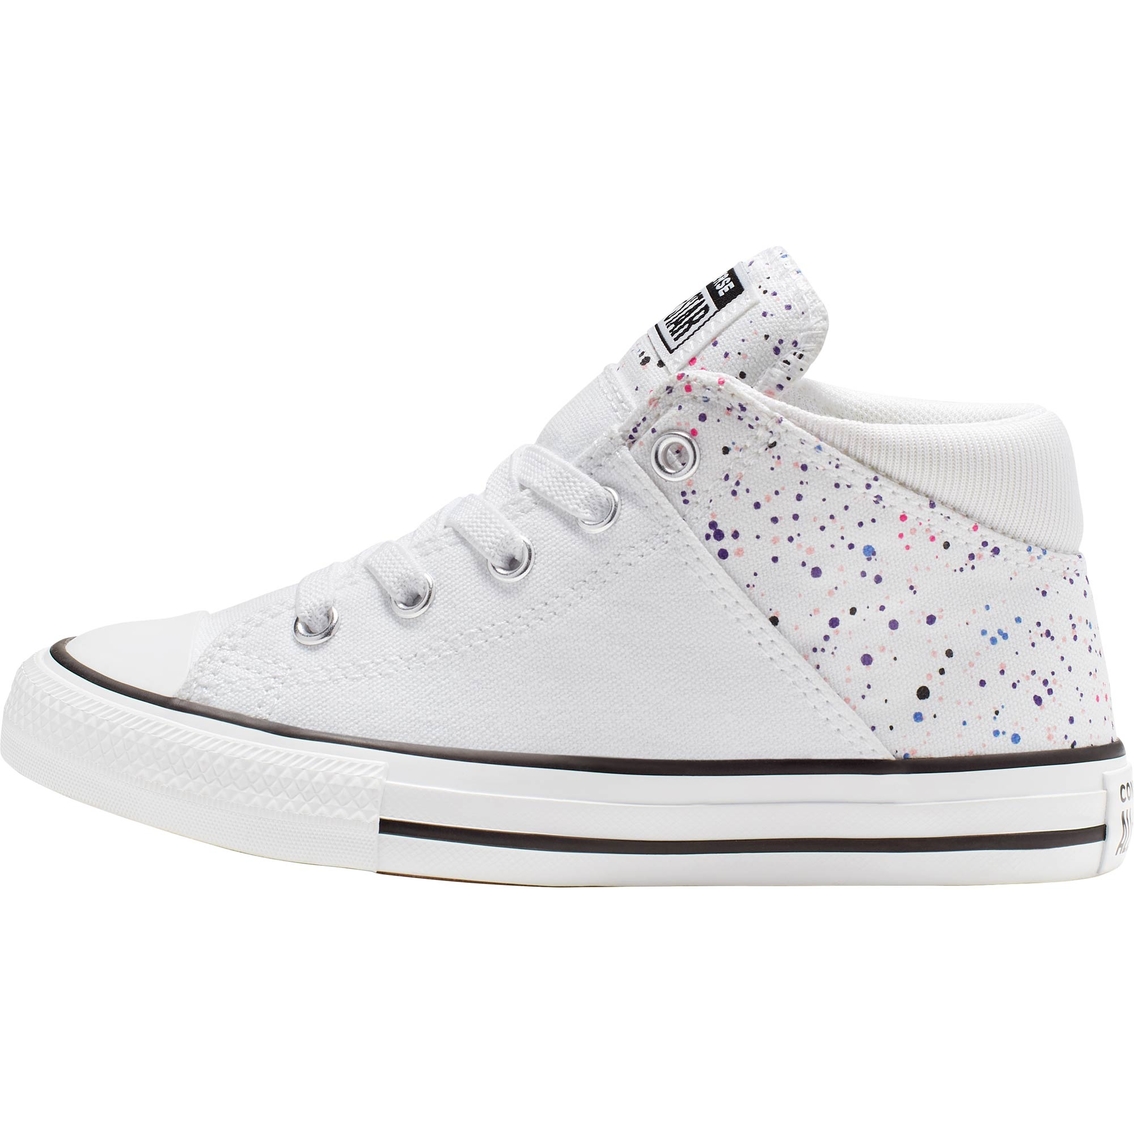 Converse Girls Chuck Taylor All Star Madison Mid PG Shoes - Image 3 of 3